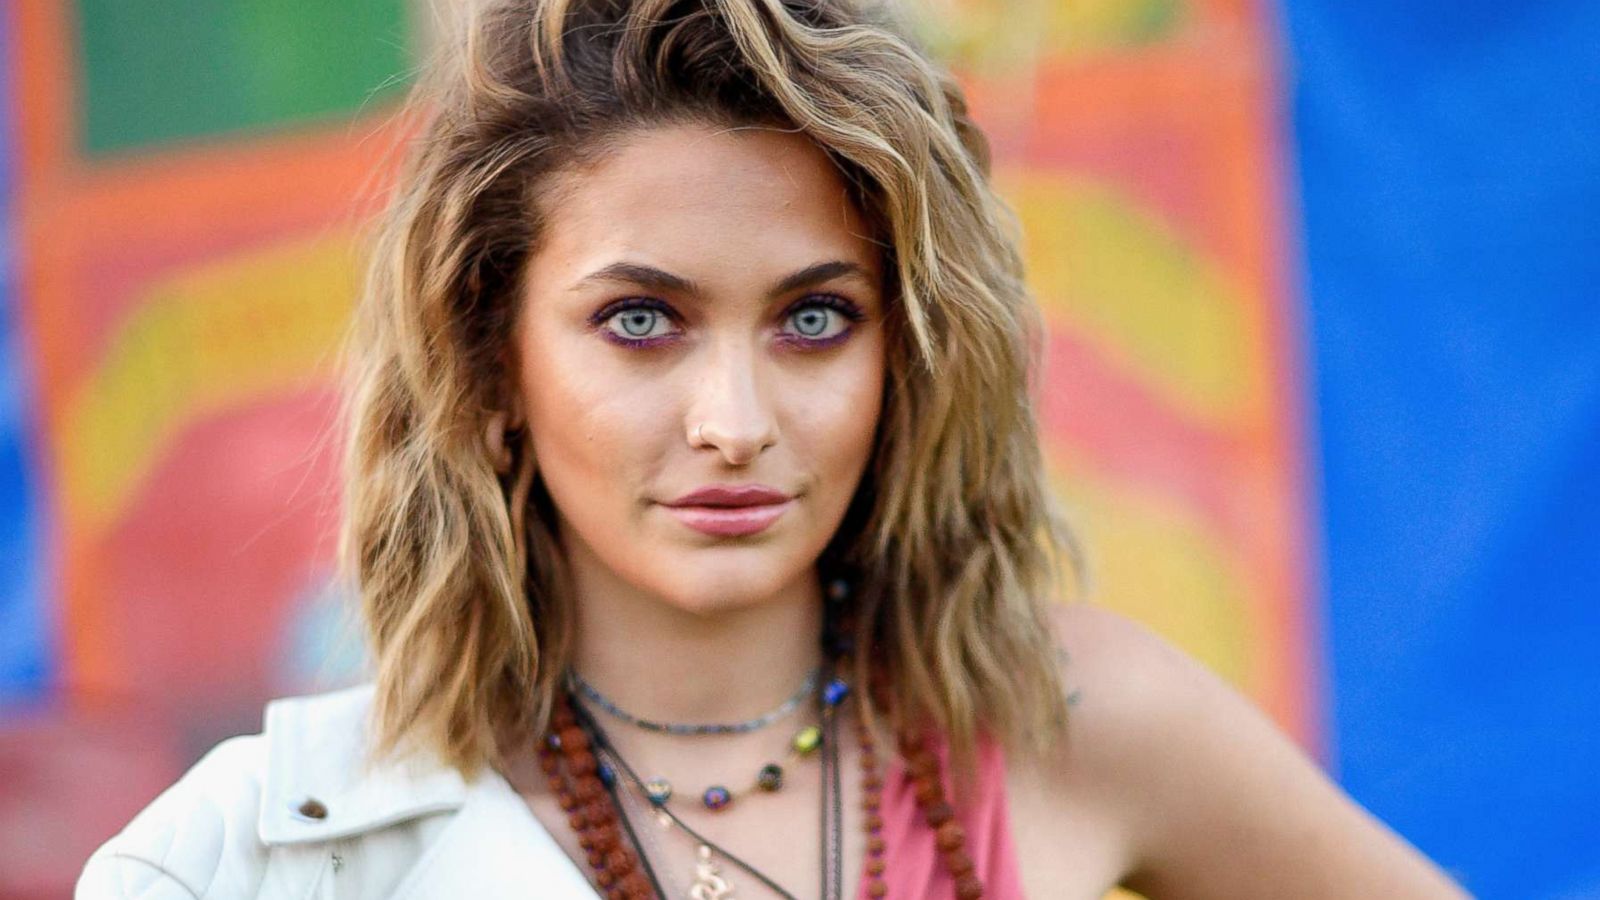  Who is Paris Jackson and How Much She Wealthy?